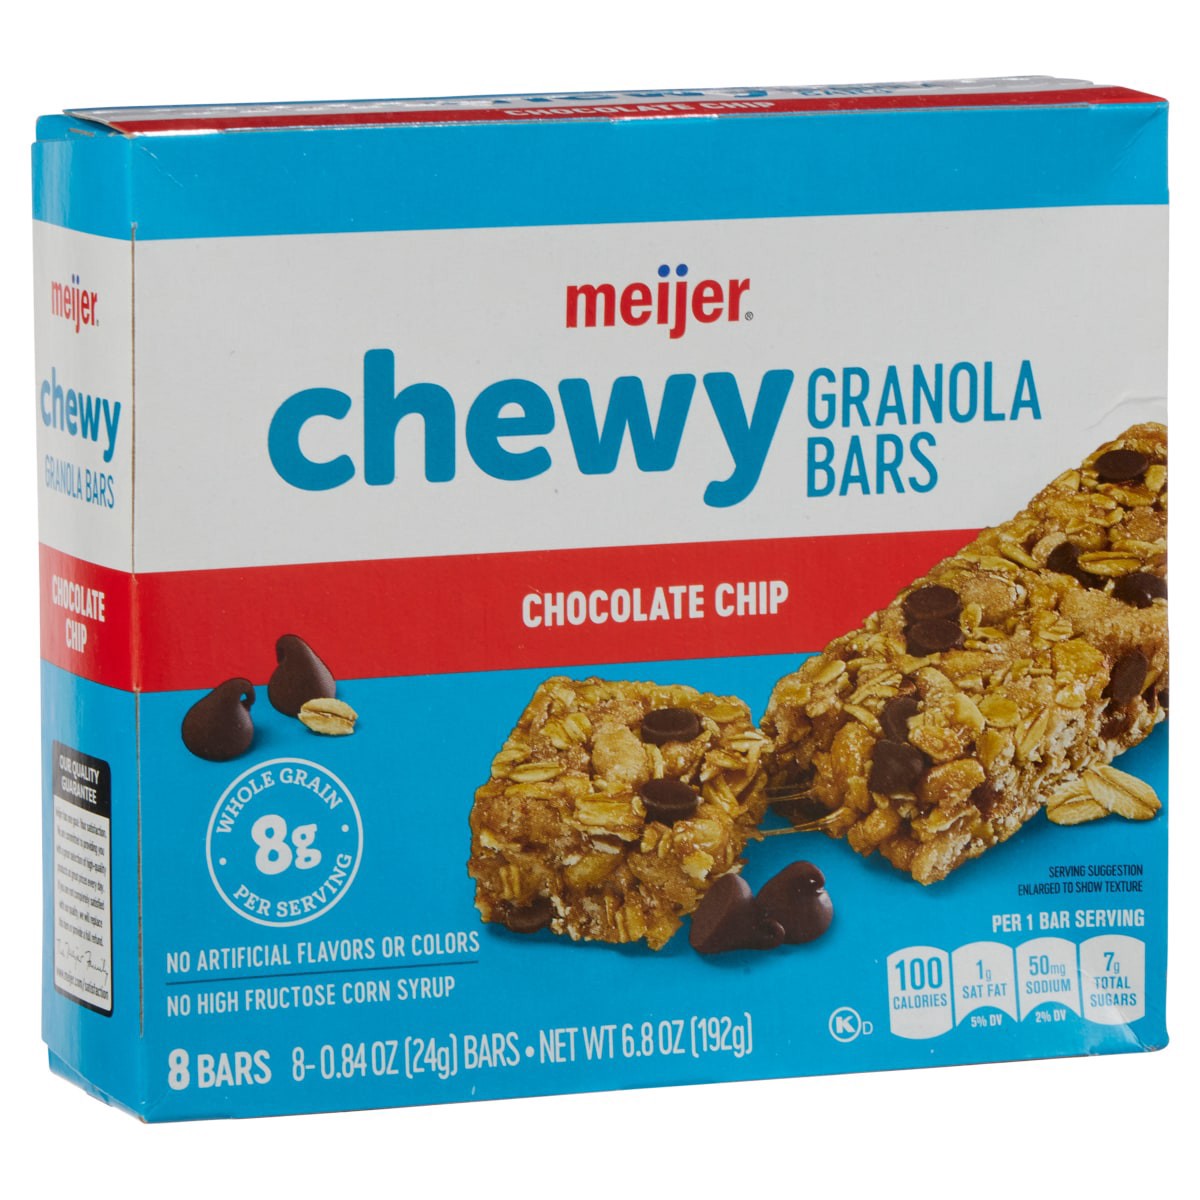 slide 5 of 29, Meijer Chewy Gronola Bars, Chocolate Chip, 8 ct